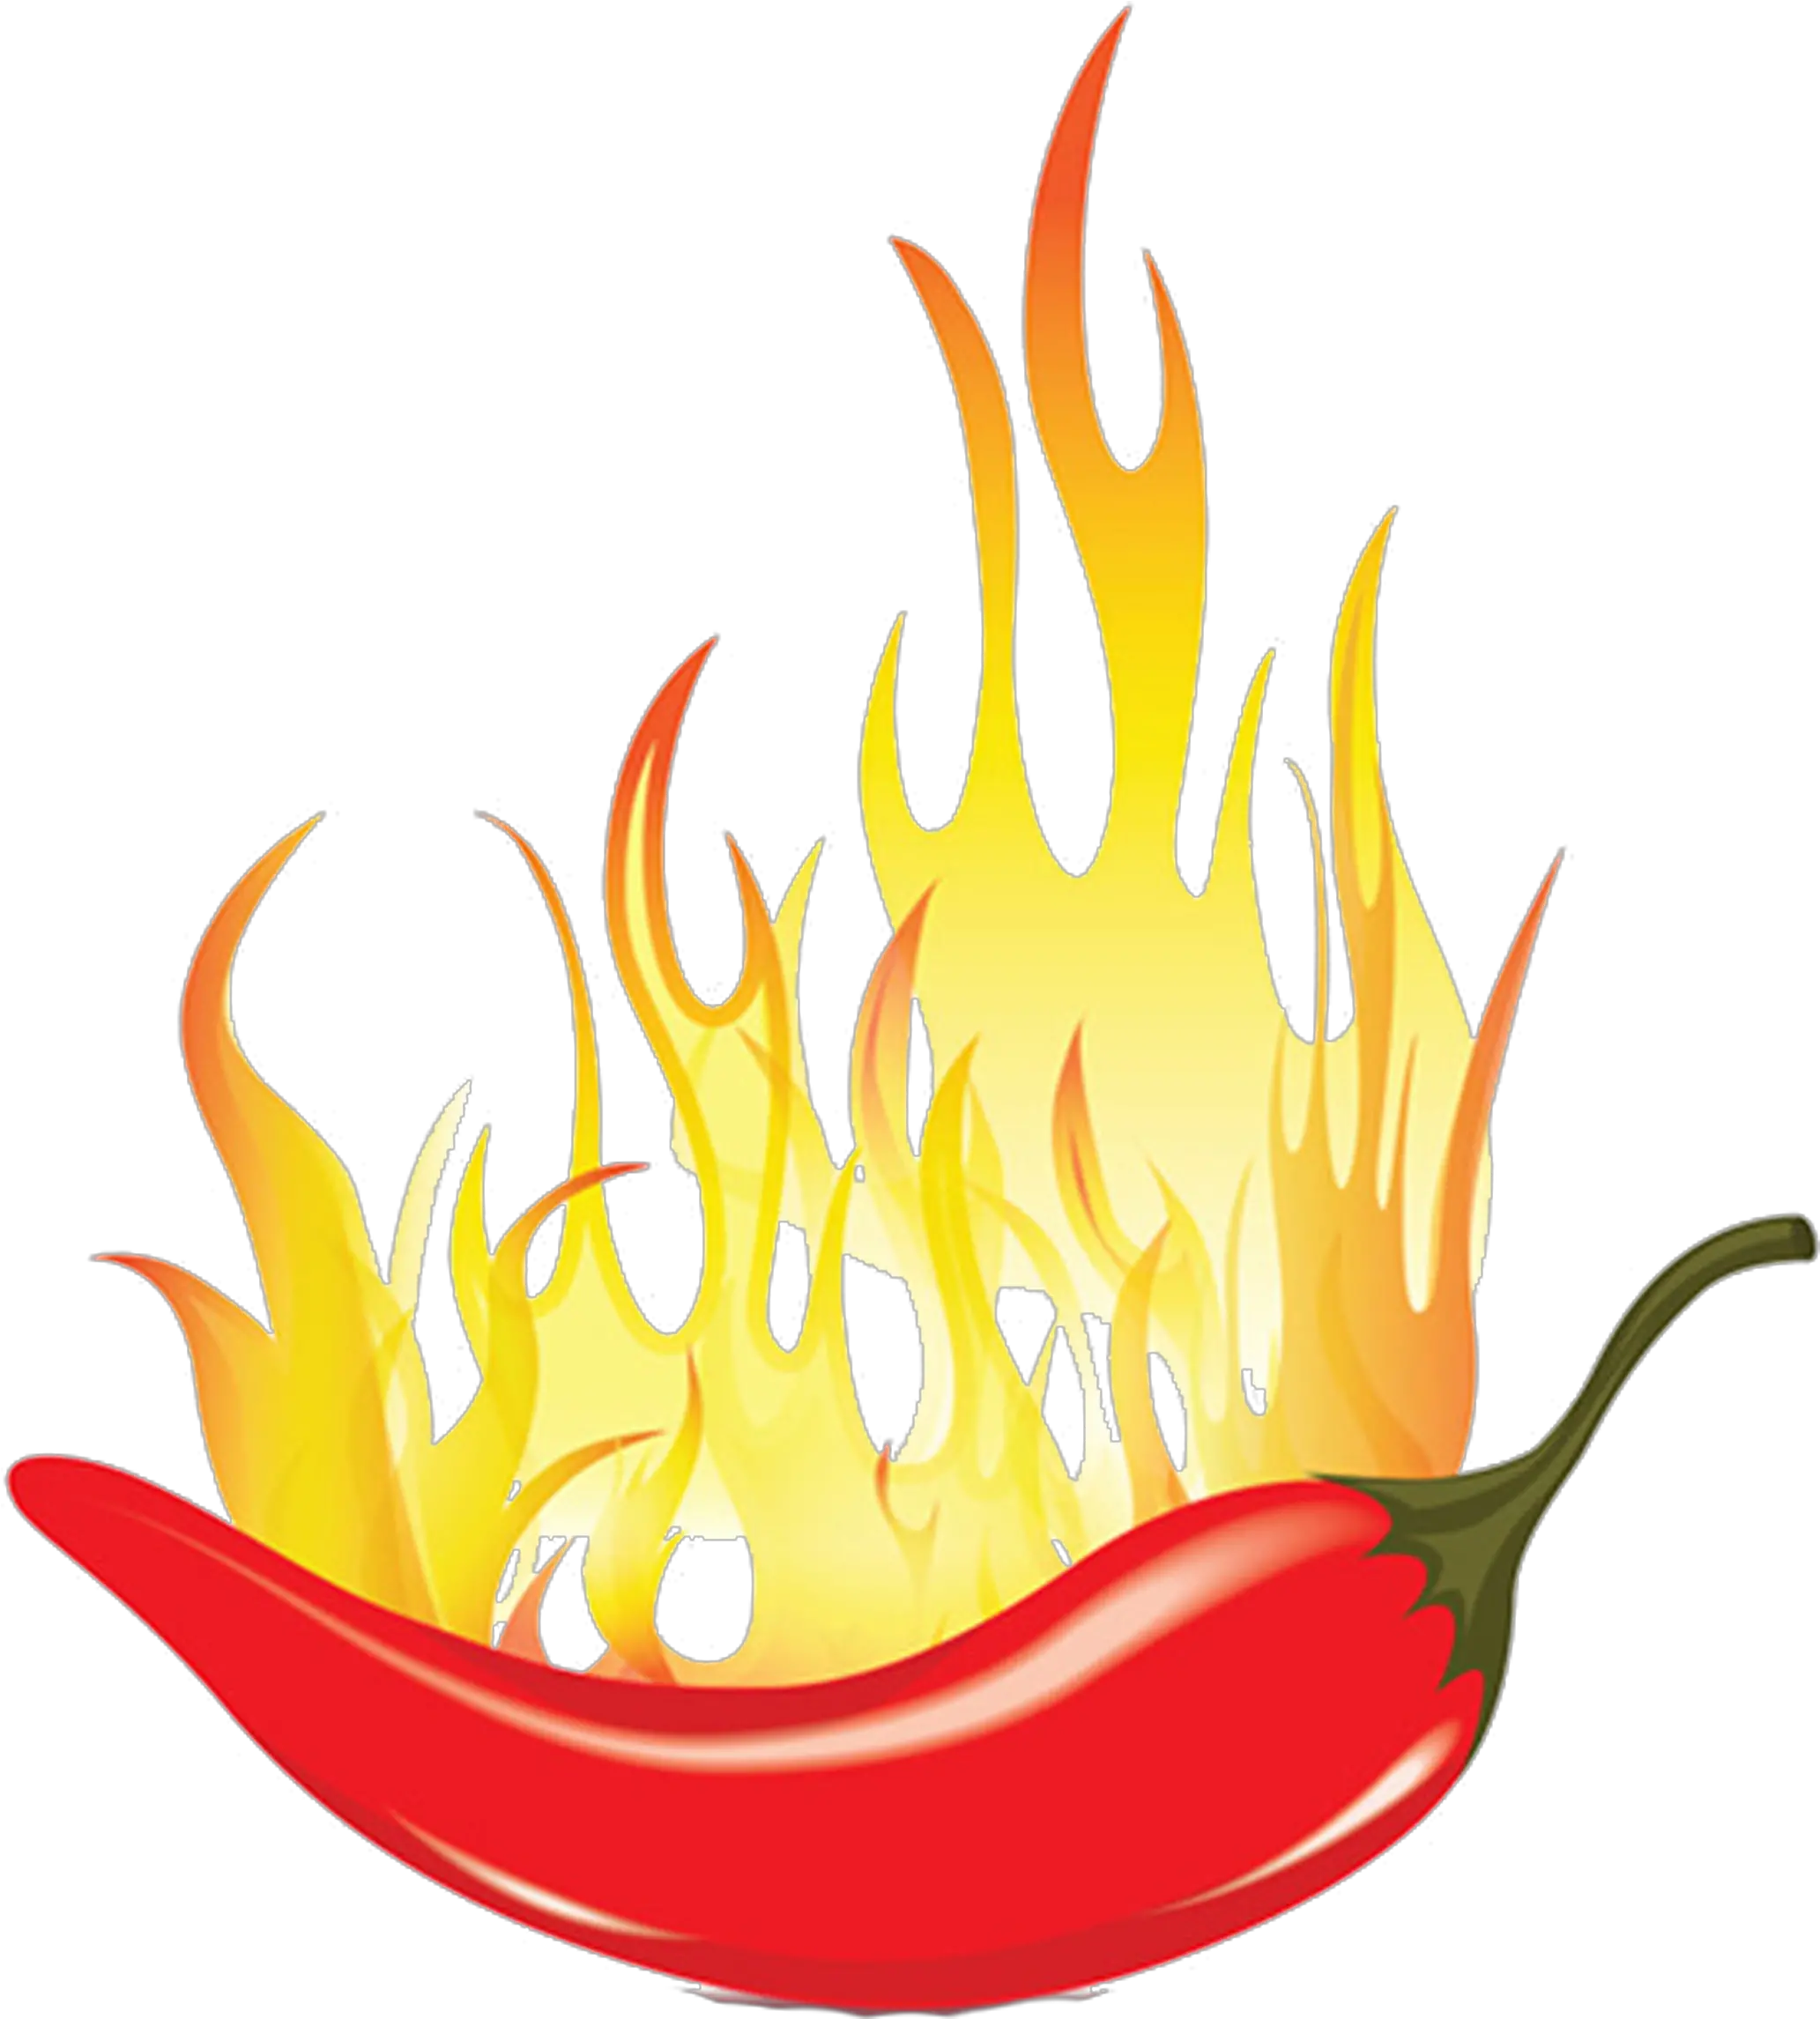 Chili Mexican Cuisine Capsicum Spice Fire Transprent Chili Red Chili With Fire Png Chili Png